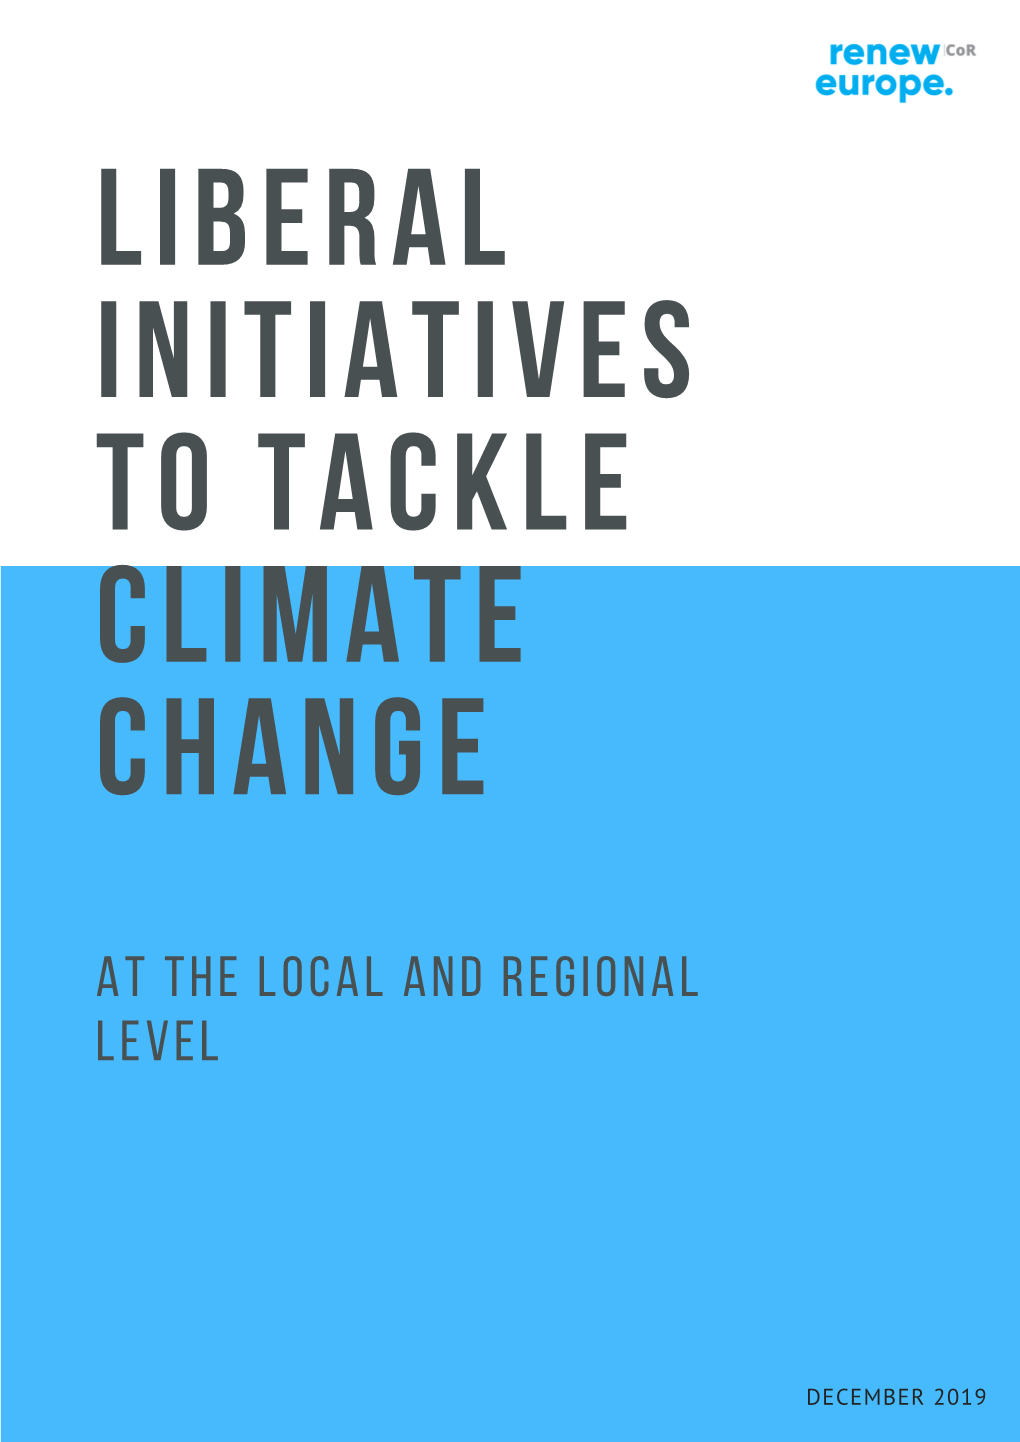 LIBERAL INITIATIVES to TACKLE CLIMATE CHANGE at the Local and Regional Level